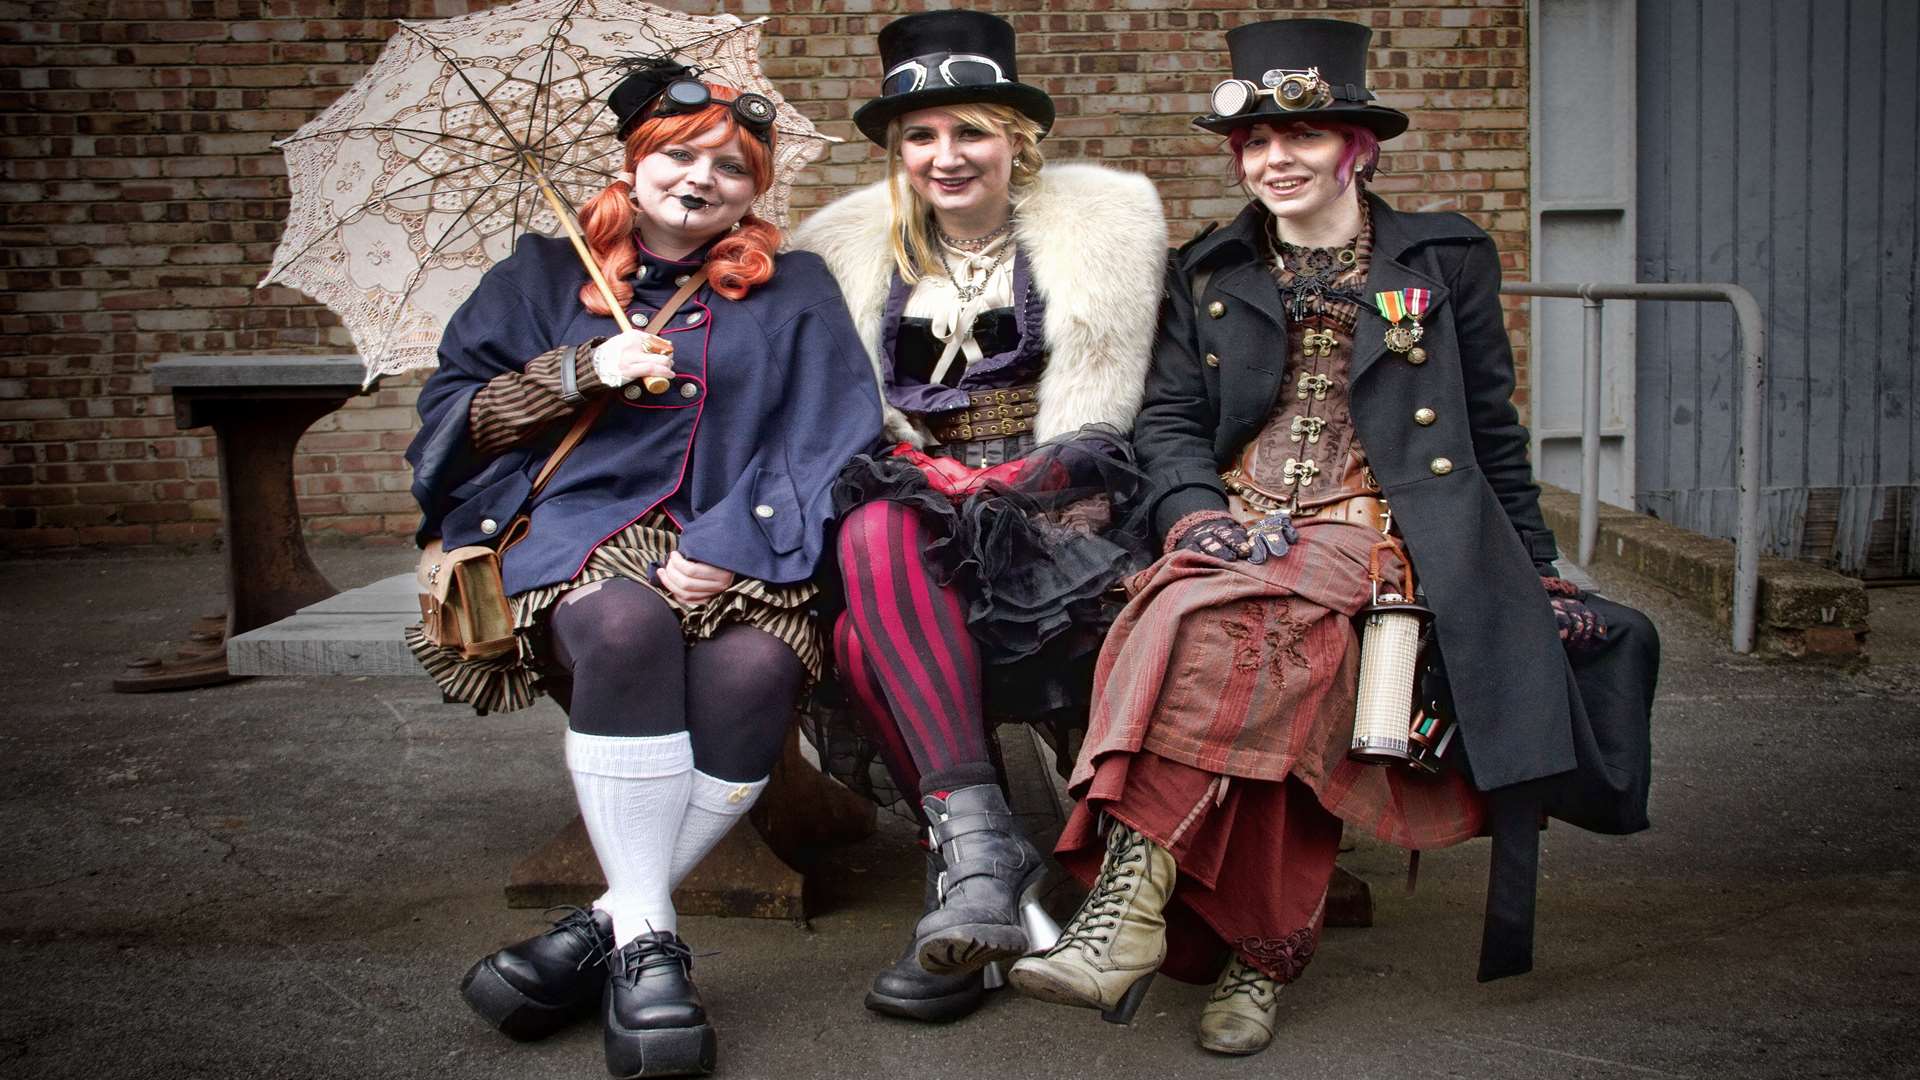 Steampunk clothing and accessories will be at the Medway Festival of Steam and Transport